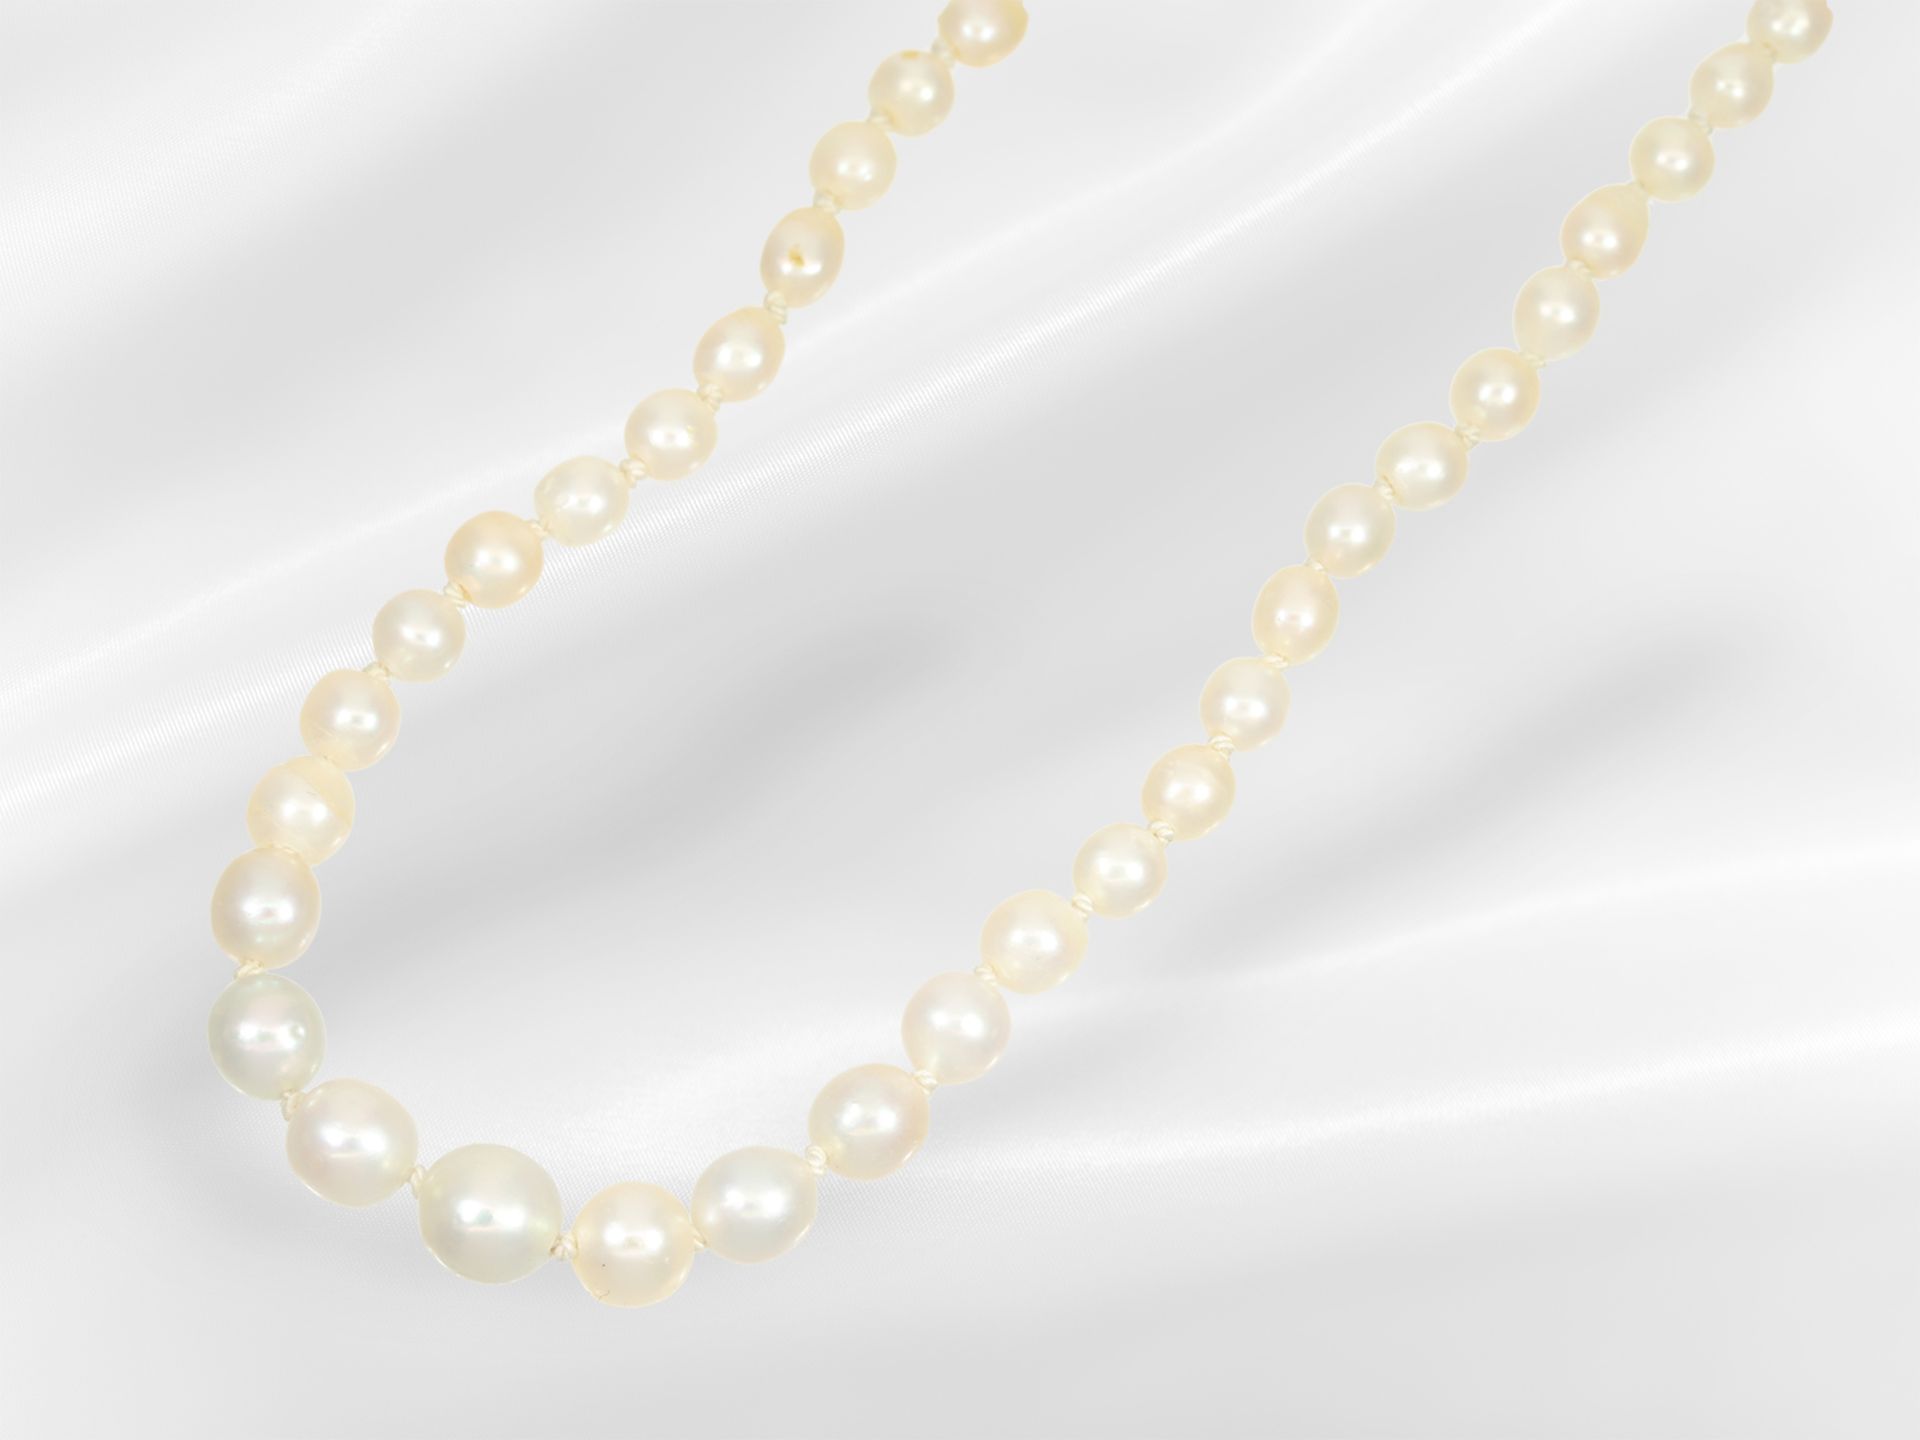 Chain: valuable antique Oriental pearl necklace, possibly from around 1900 - Image 3 of 3